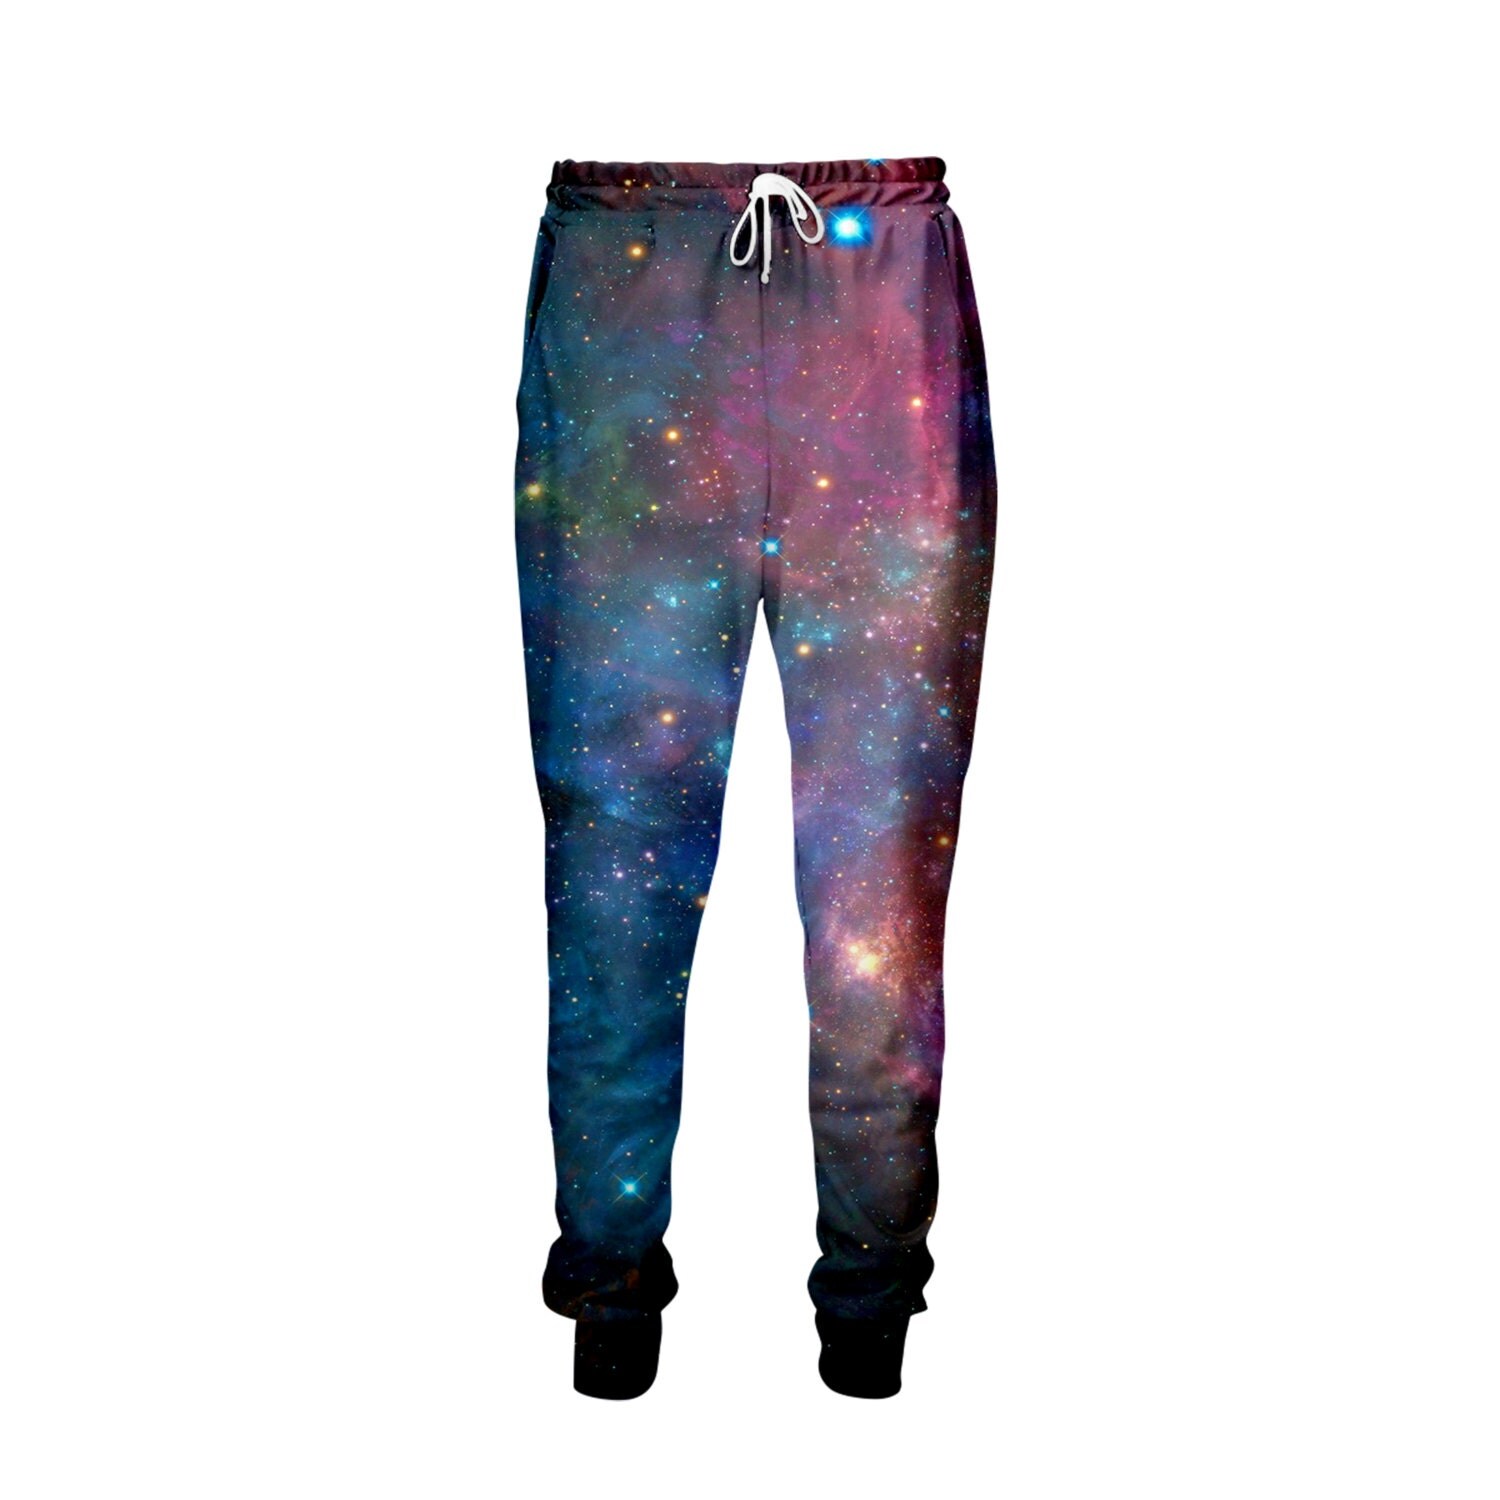 Galaxy Jogger Pants by Shweeet on Etsy